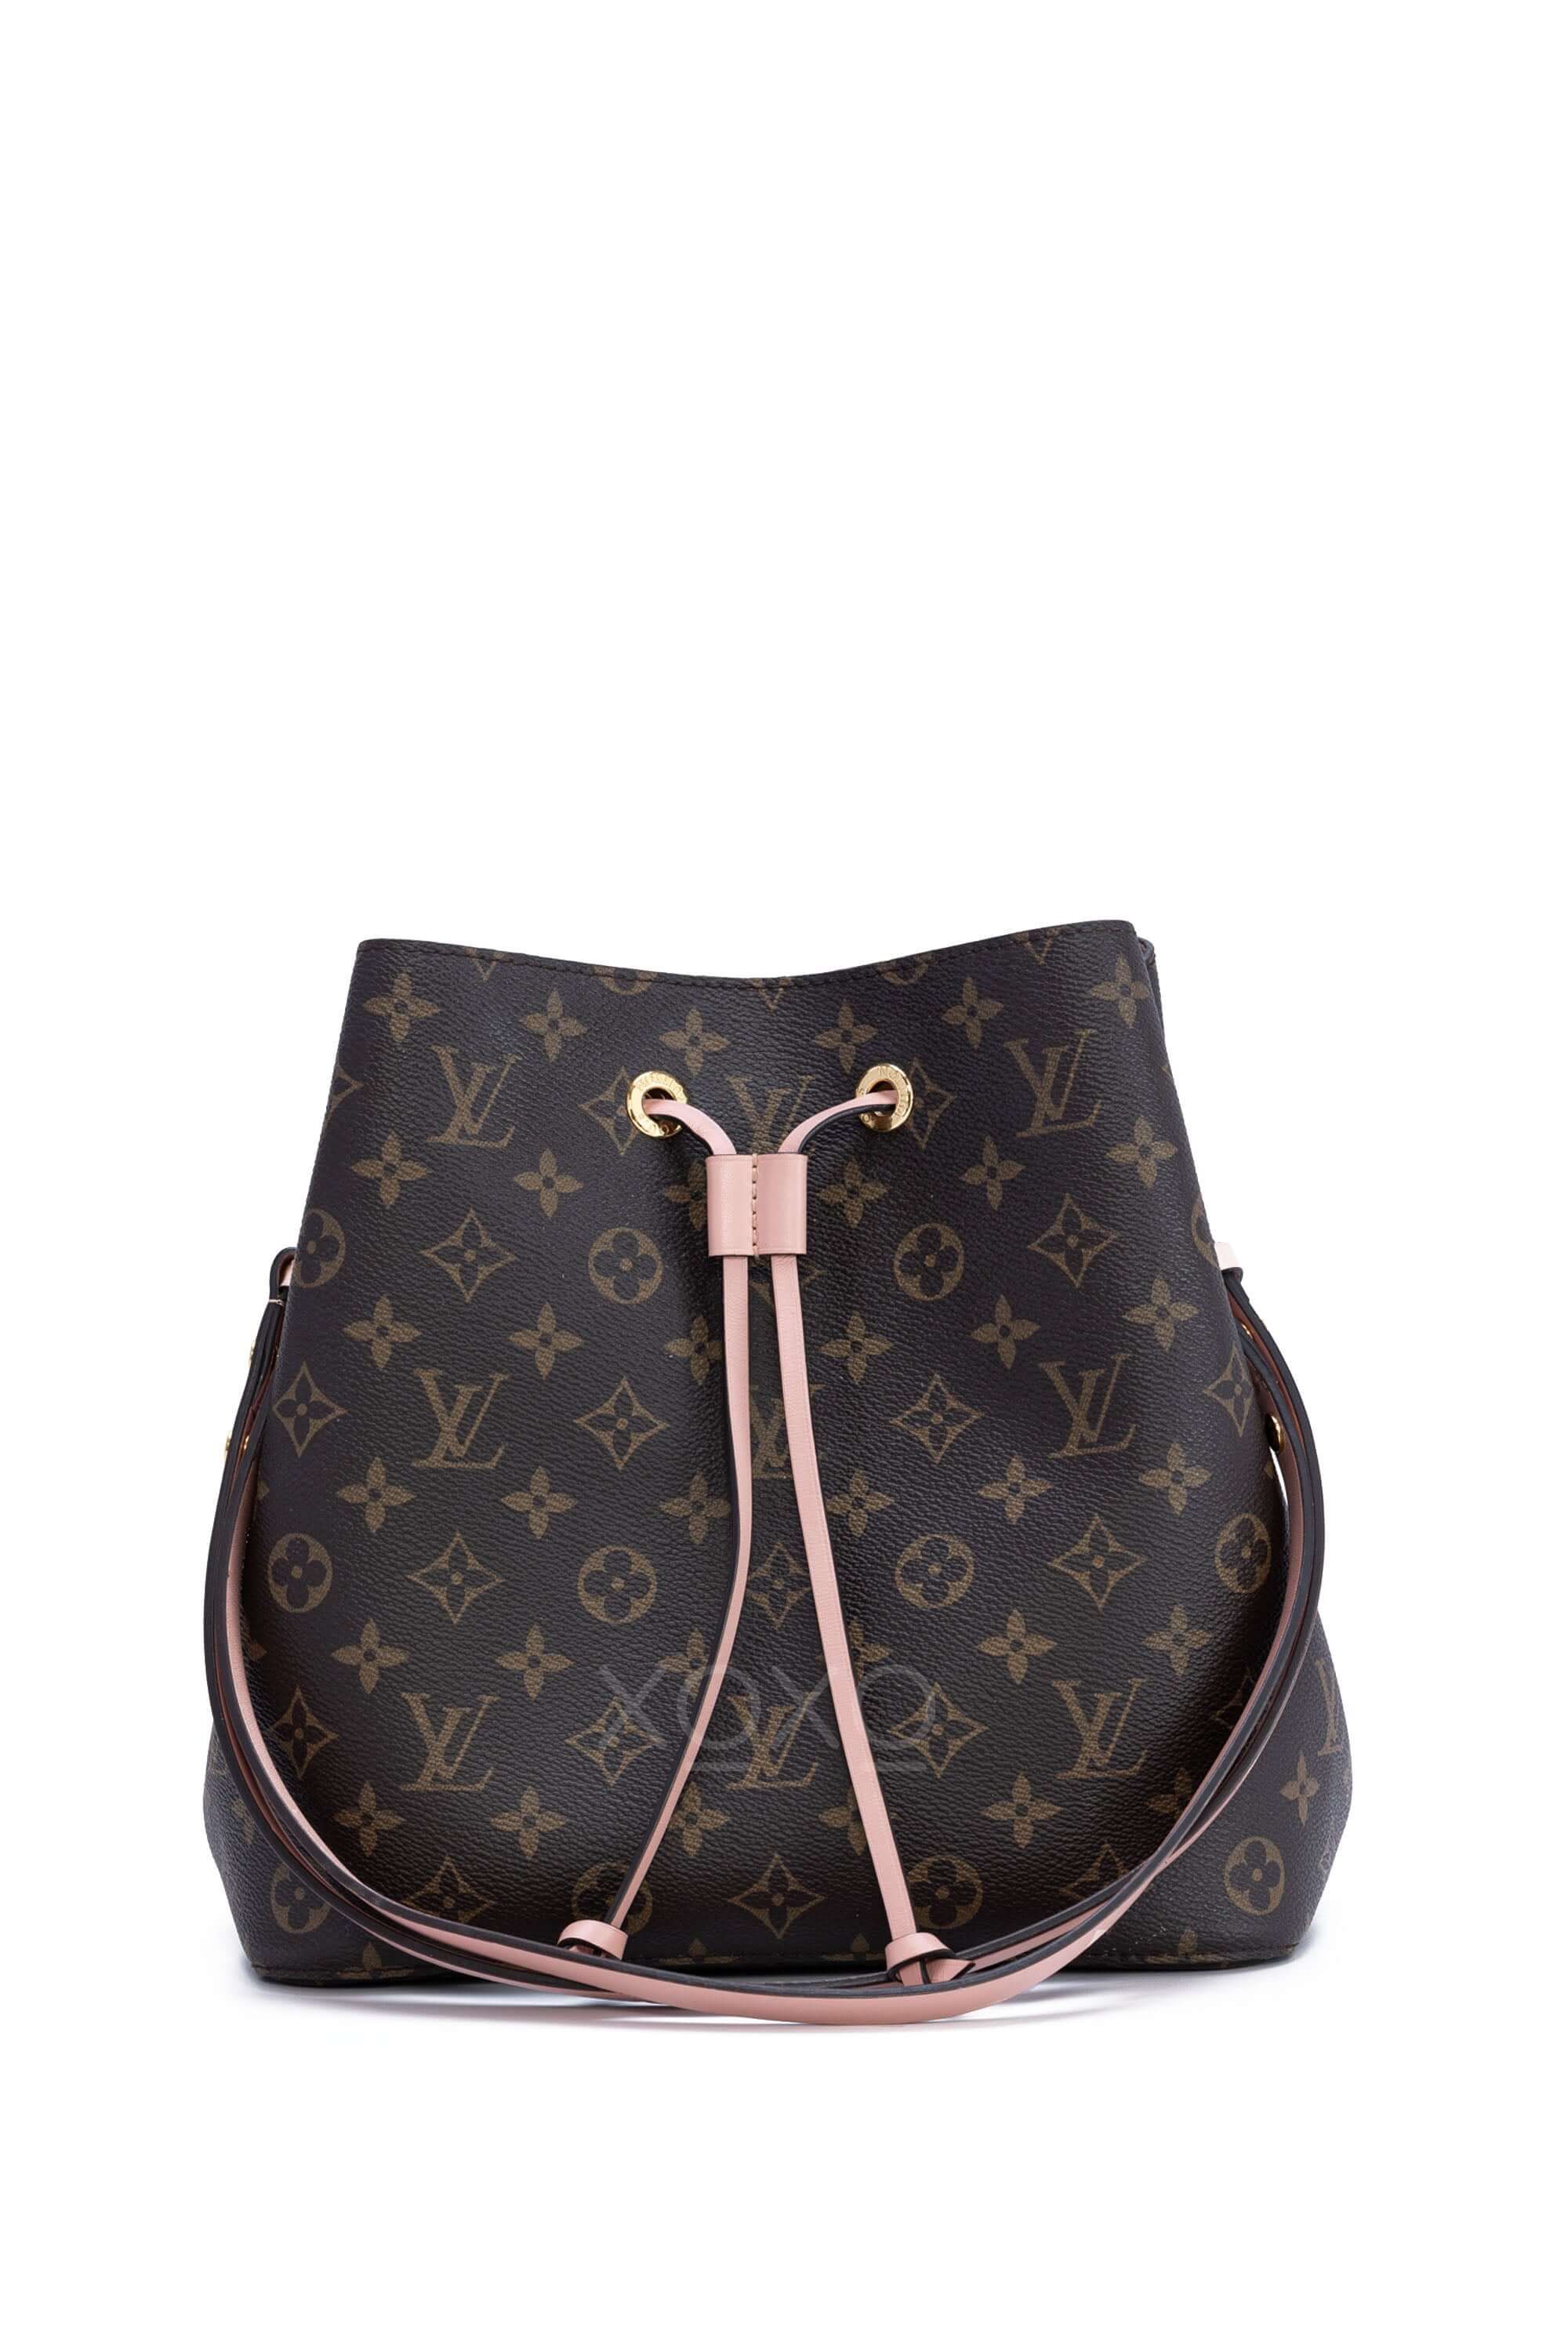 The Louis Vuitton Neonoe Bag May Be the Brand's Most Underrated Design -  PurseBlog